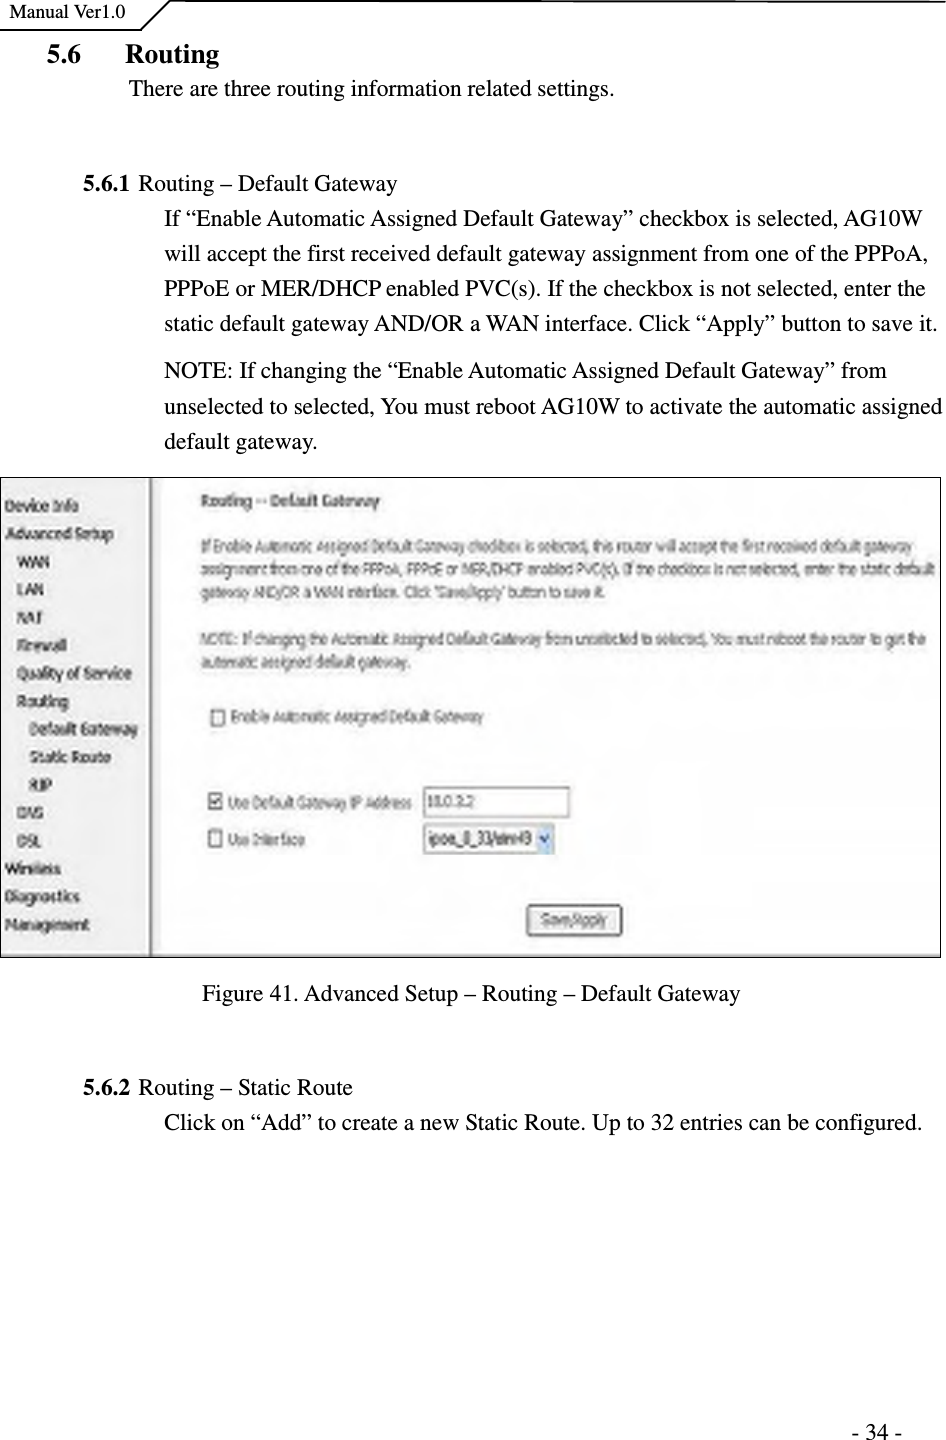    Manual Ver1.0                                                                      - 34 - 5.6 Routing There are three routing information related settings.  5.6.1 Routing – Default Gateway If “Enable Automatic Assigned Default Gateway” checkbox is selected, AG10W will accept the first received default gateway assignment from one of the PPPoA, PPPoE or MER/DHCP enabled PVC(s). If the checkbox is not selected, enter the static default gateway AND/OR a WAN interface. Click “Apply” button to save it. NOTE: If changing the “Enable Automatic Assigned Default Gateway” from unselected to selected, You must reboot AG10W to activate the automatic assigned default gateway.  Figure 41. Advanced Setup – Routing – Default Gateway  5.6.2 Routing – Static Route   Click on “Add” to create a new Static Route. Up to 32 entries can be configured. 